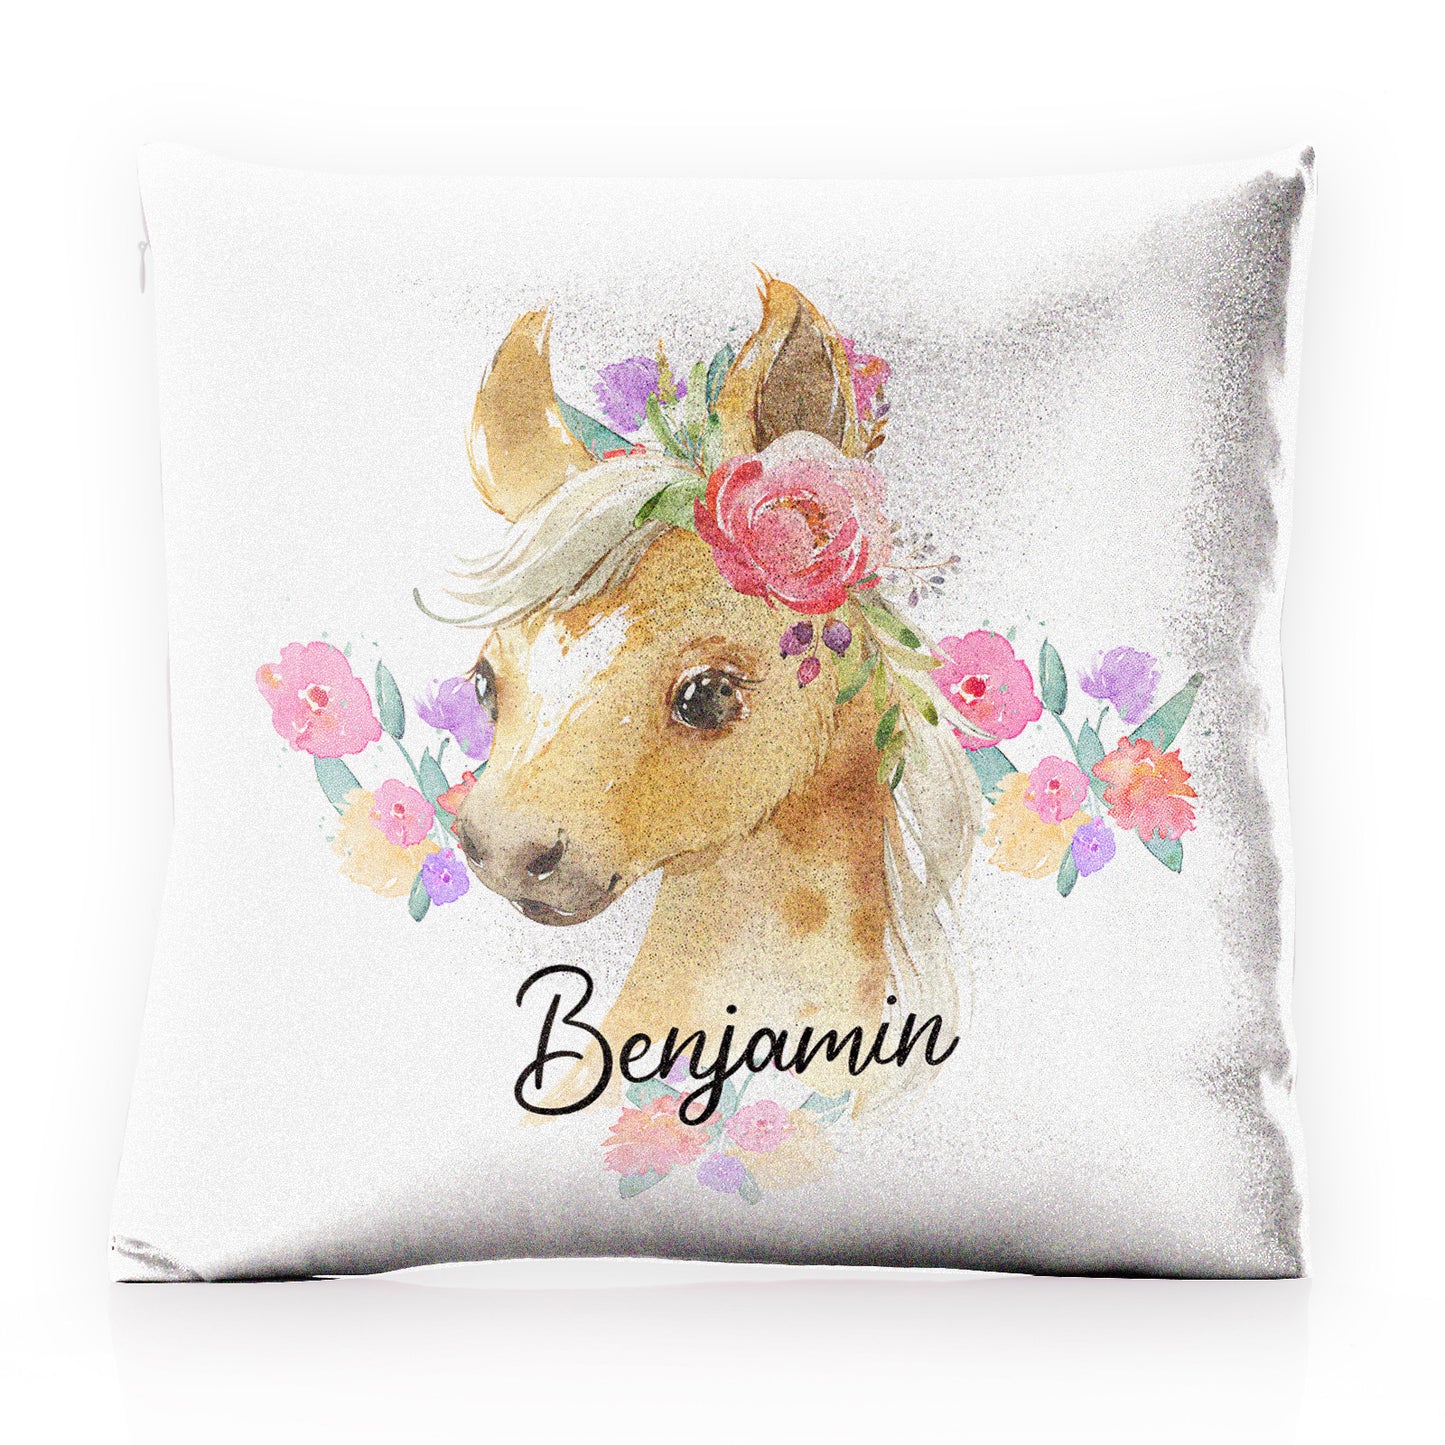 Personalised Glitter Cushion with Palomino Horse Multicolour Flower Print and Cute Text